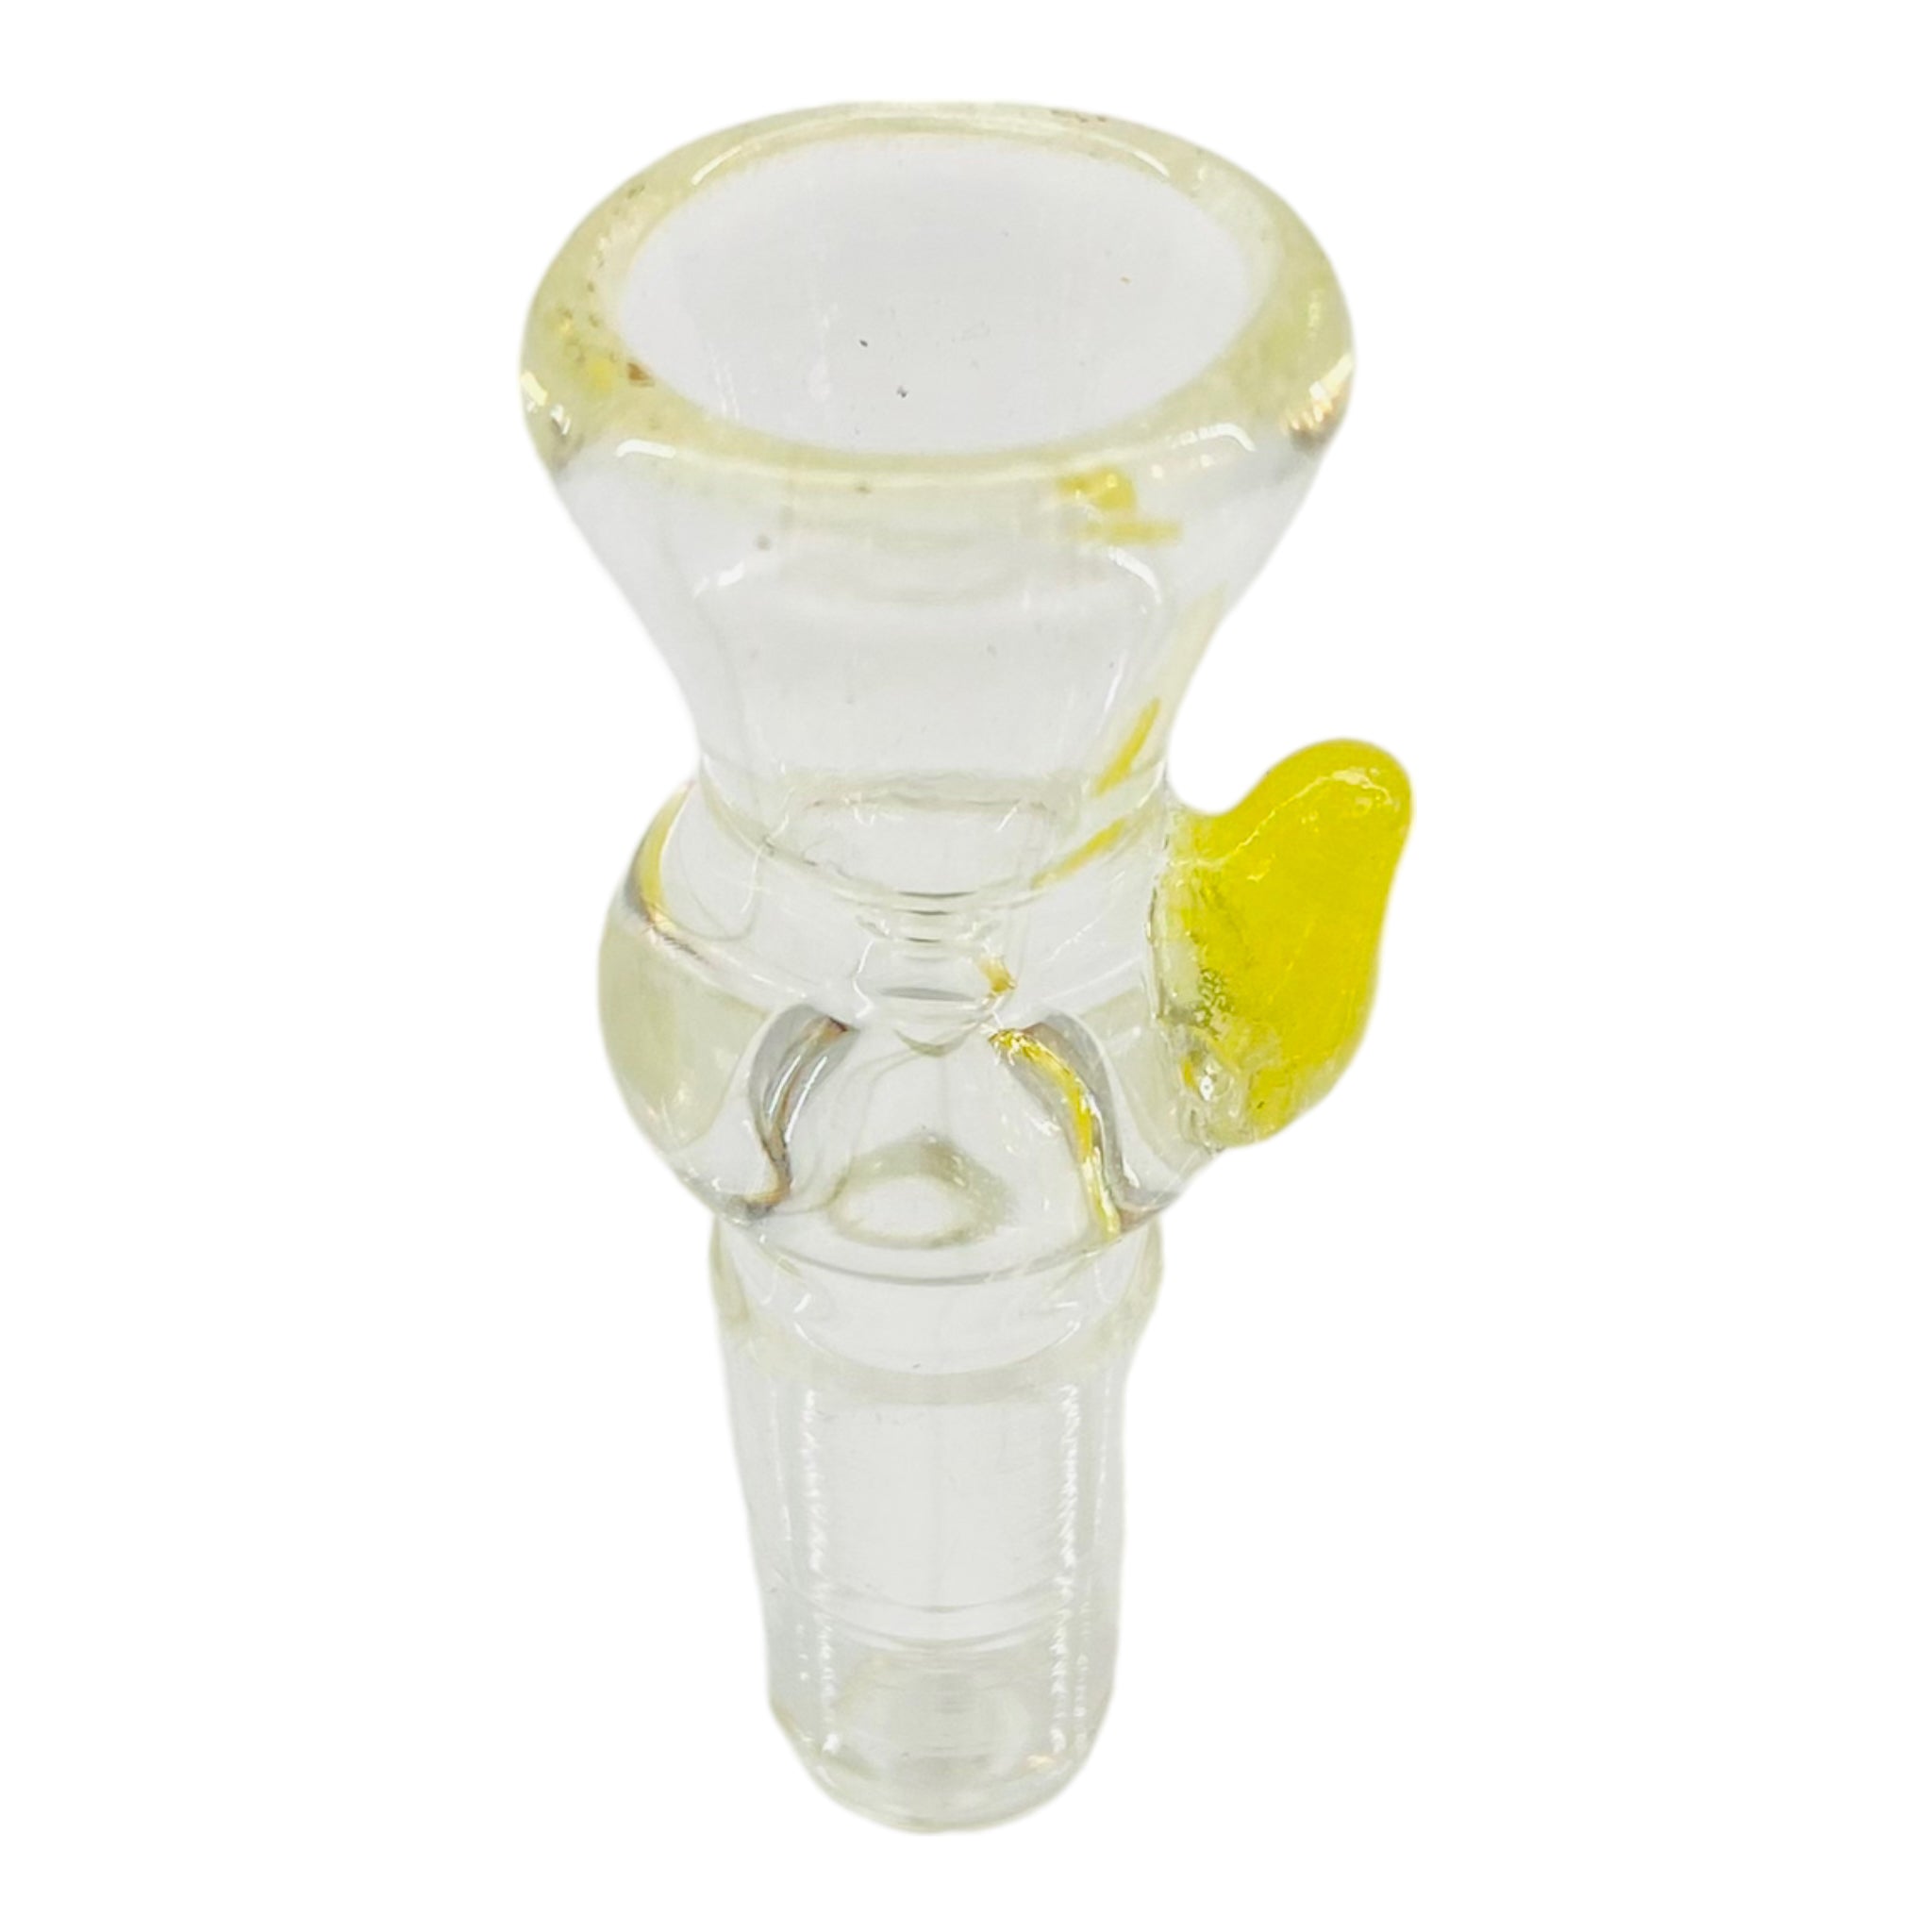 14mm Flower Bowl - Clear Martini Shape Funnel Bong Bowl Piece With Color Dot - Yellow